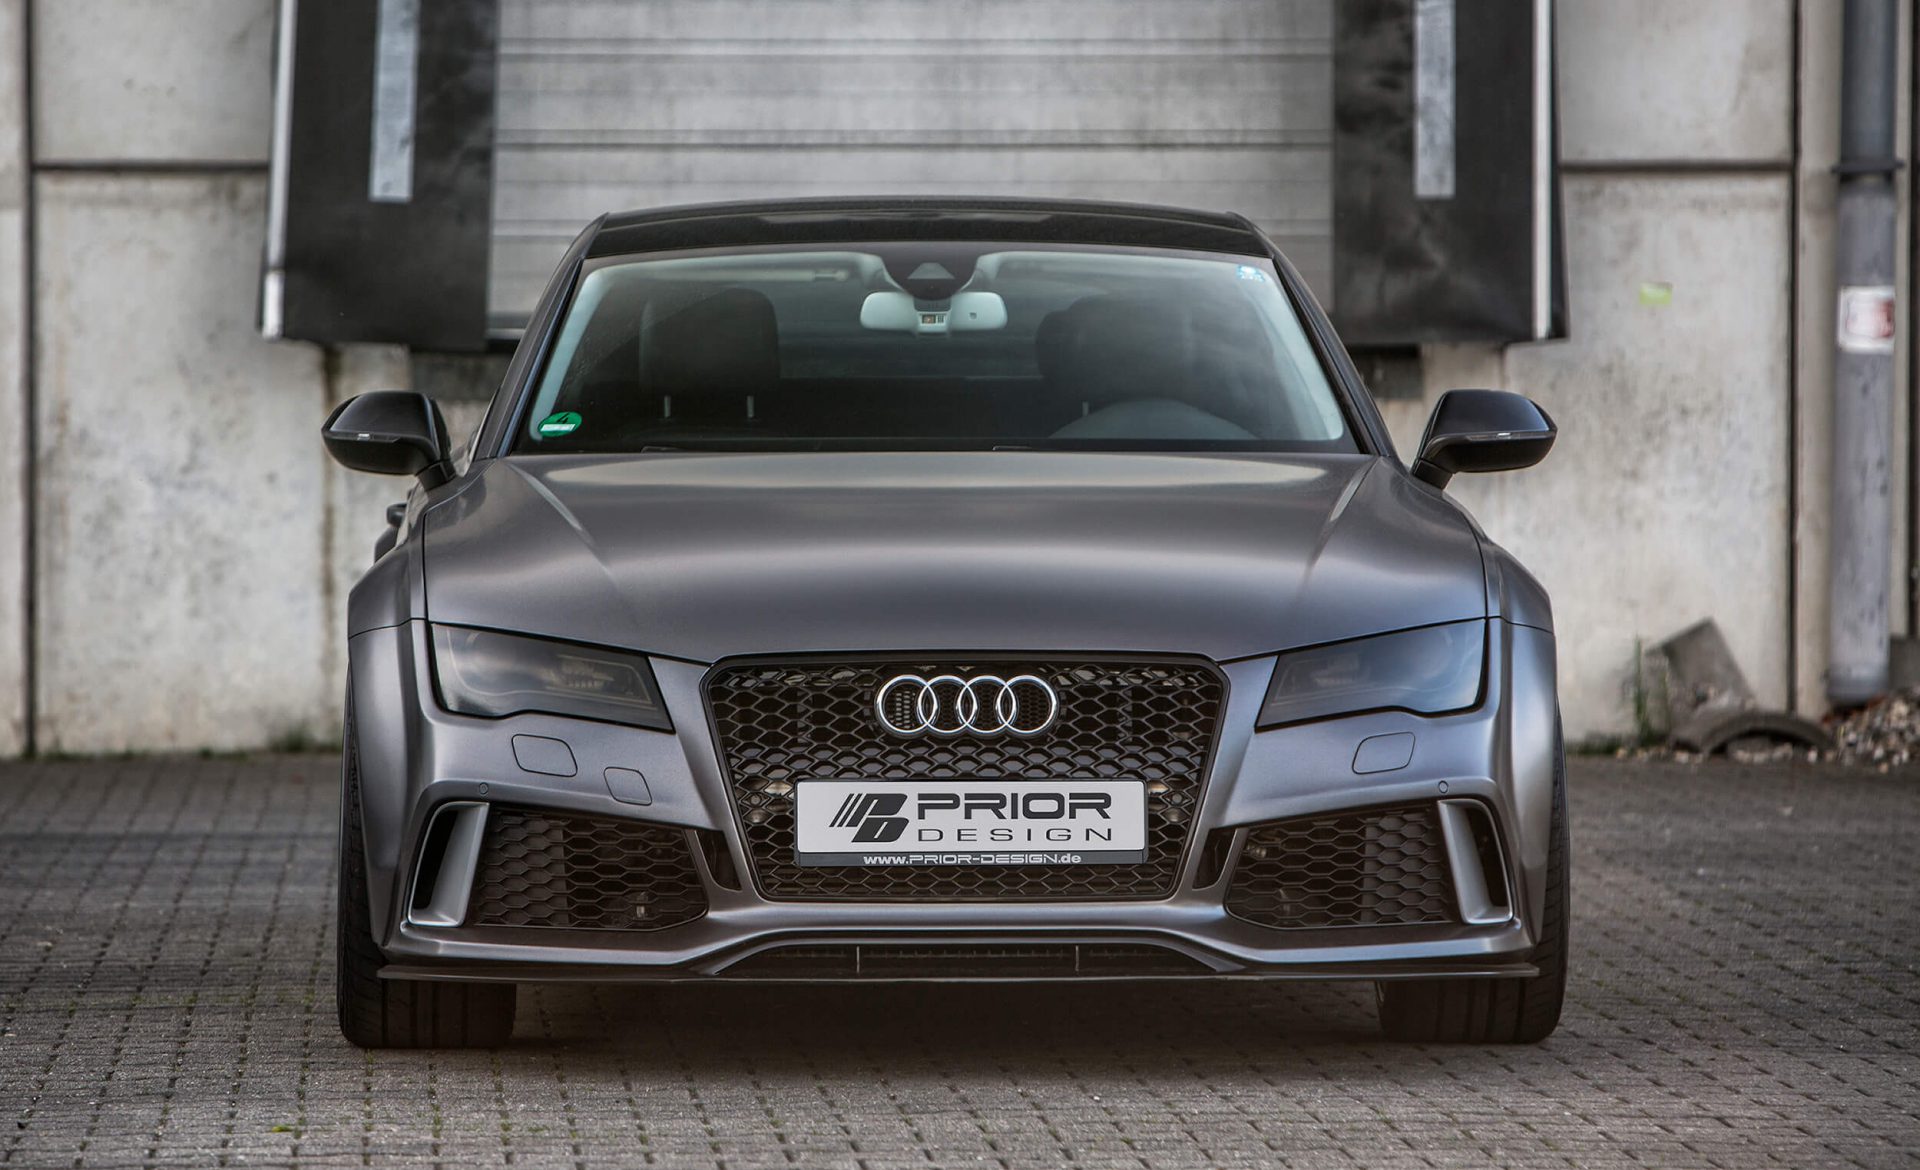 PD700R Front Bumper + Front Add-On Spoiler for Audi A7/S7/RS7 C7